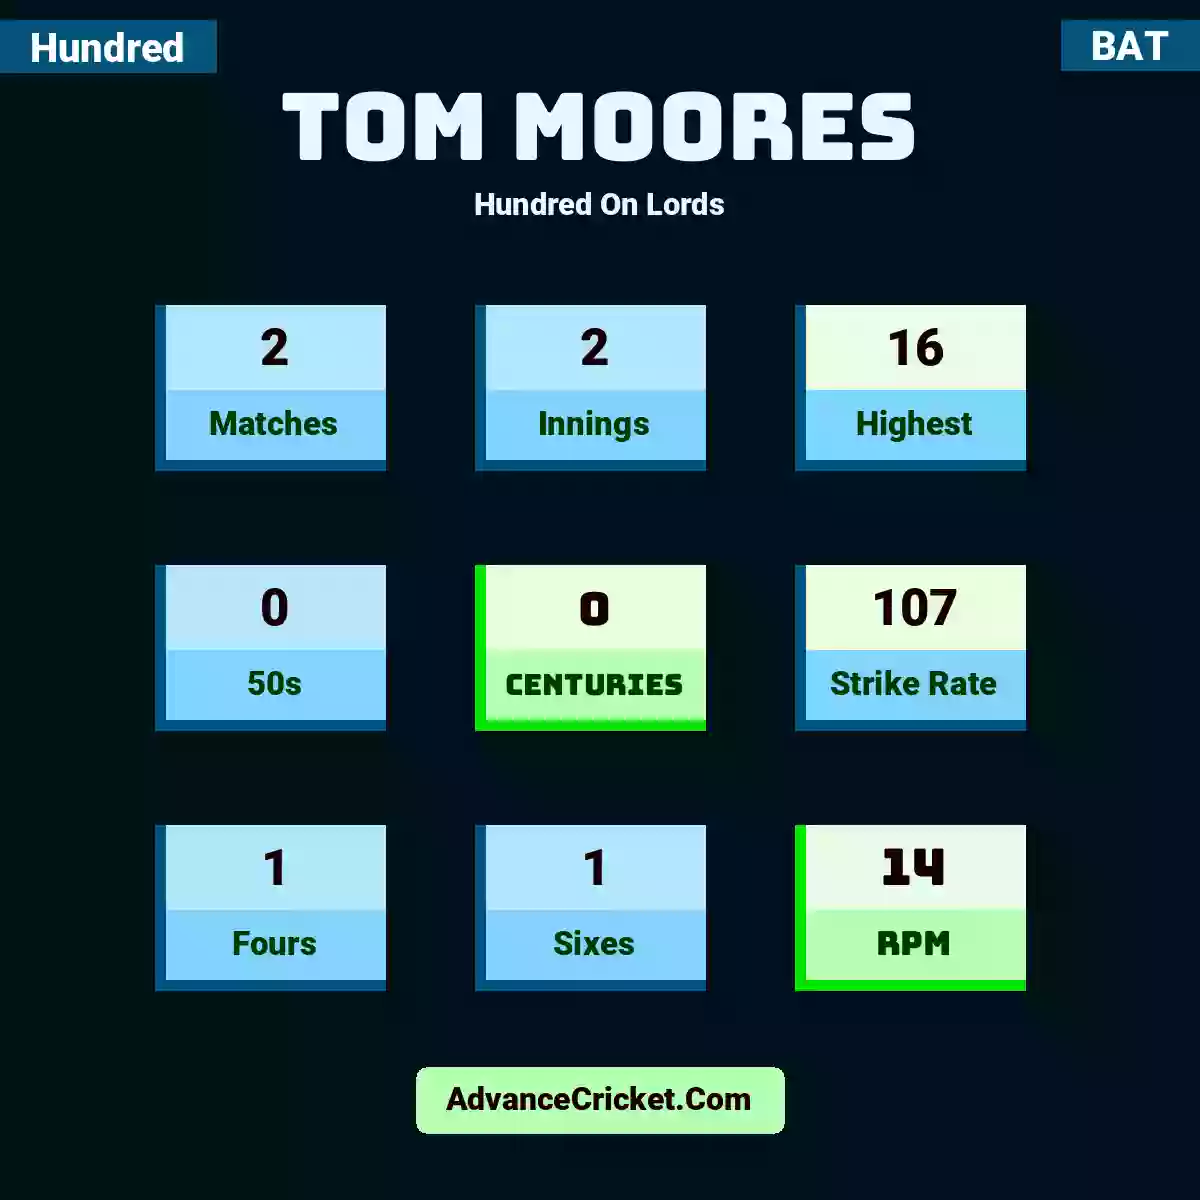 Tom Moores Hundred  On Lords, Tom Moores played 2 matches, scored 16 runs as highest, 0 half-centuries, and 0 centuries, with a strike rate of 107. T.Moores hit 1 fours and 1 sixes, with an RPM of 14.